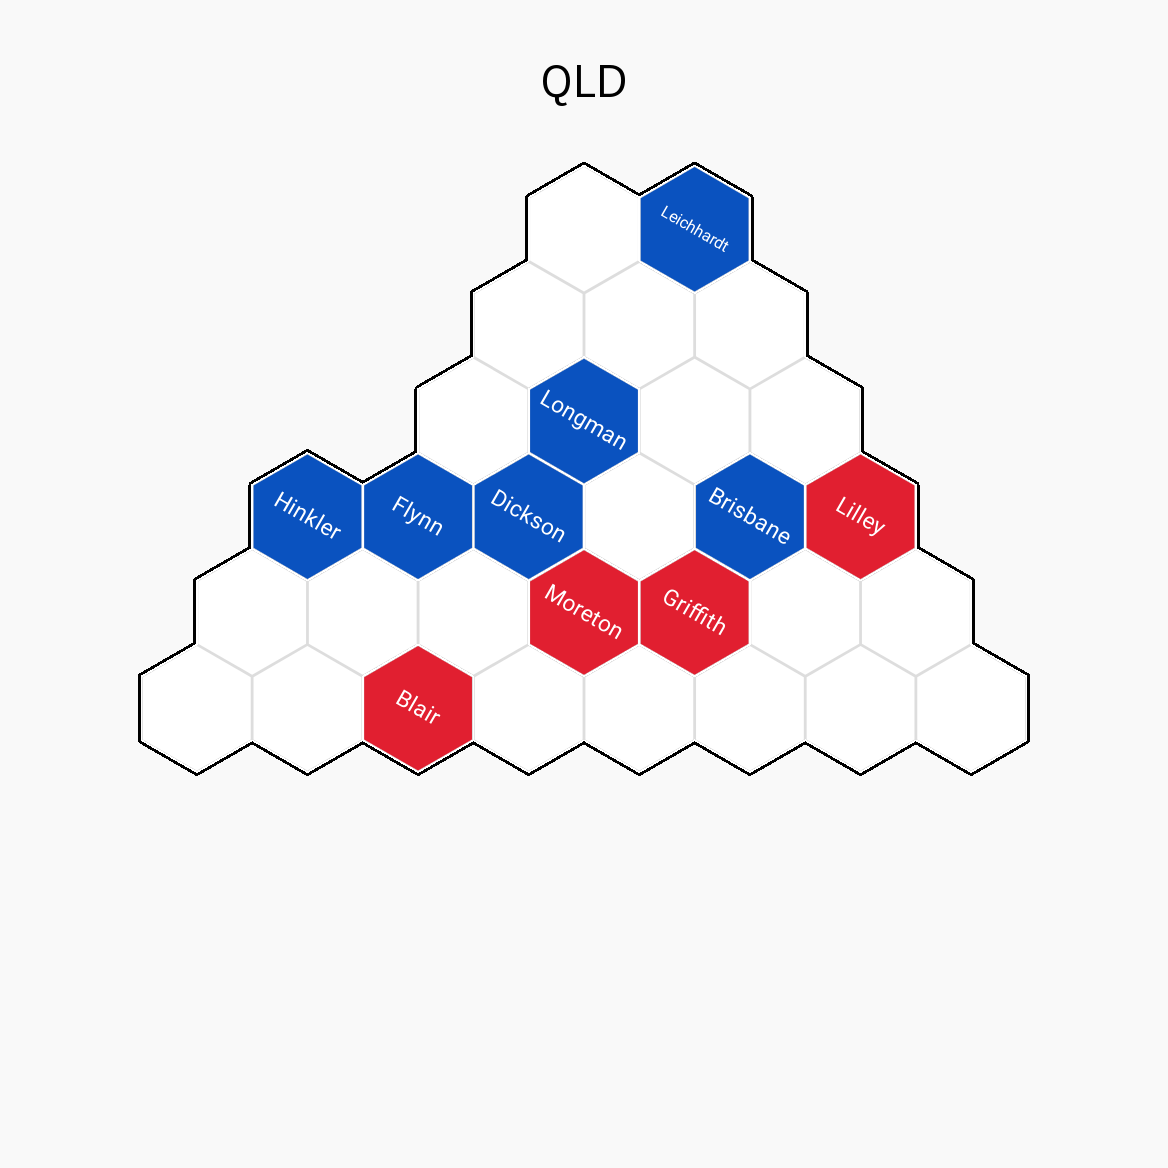 A white map of Queensland divided up into hexagonal shapes, with some of the shapes coloured in red, blue or grey..